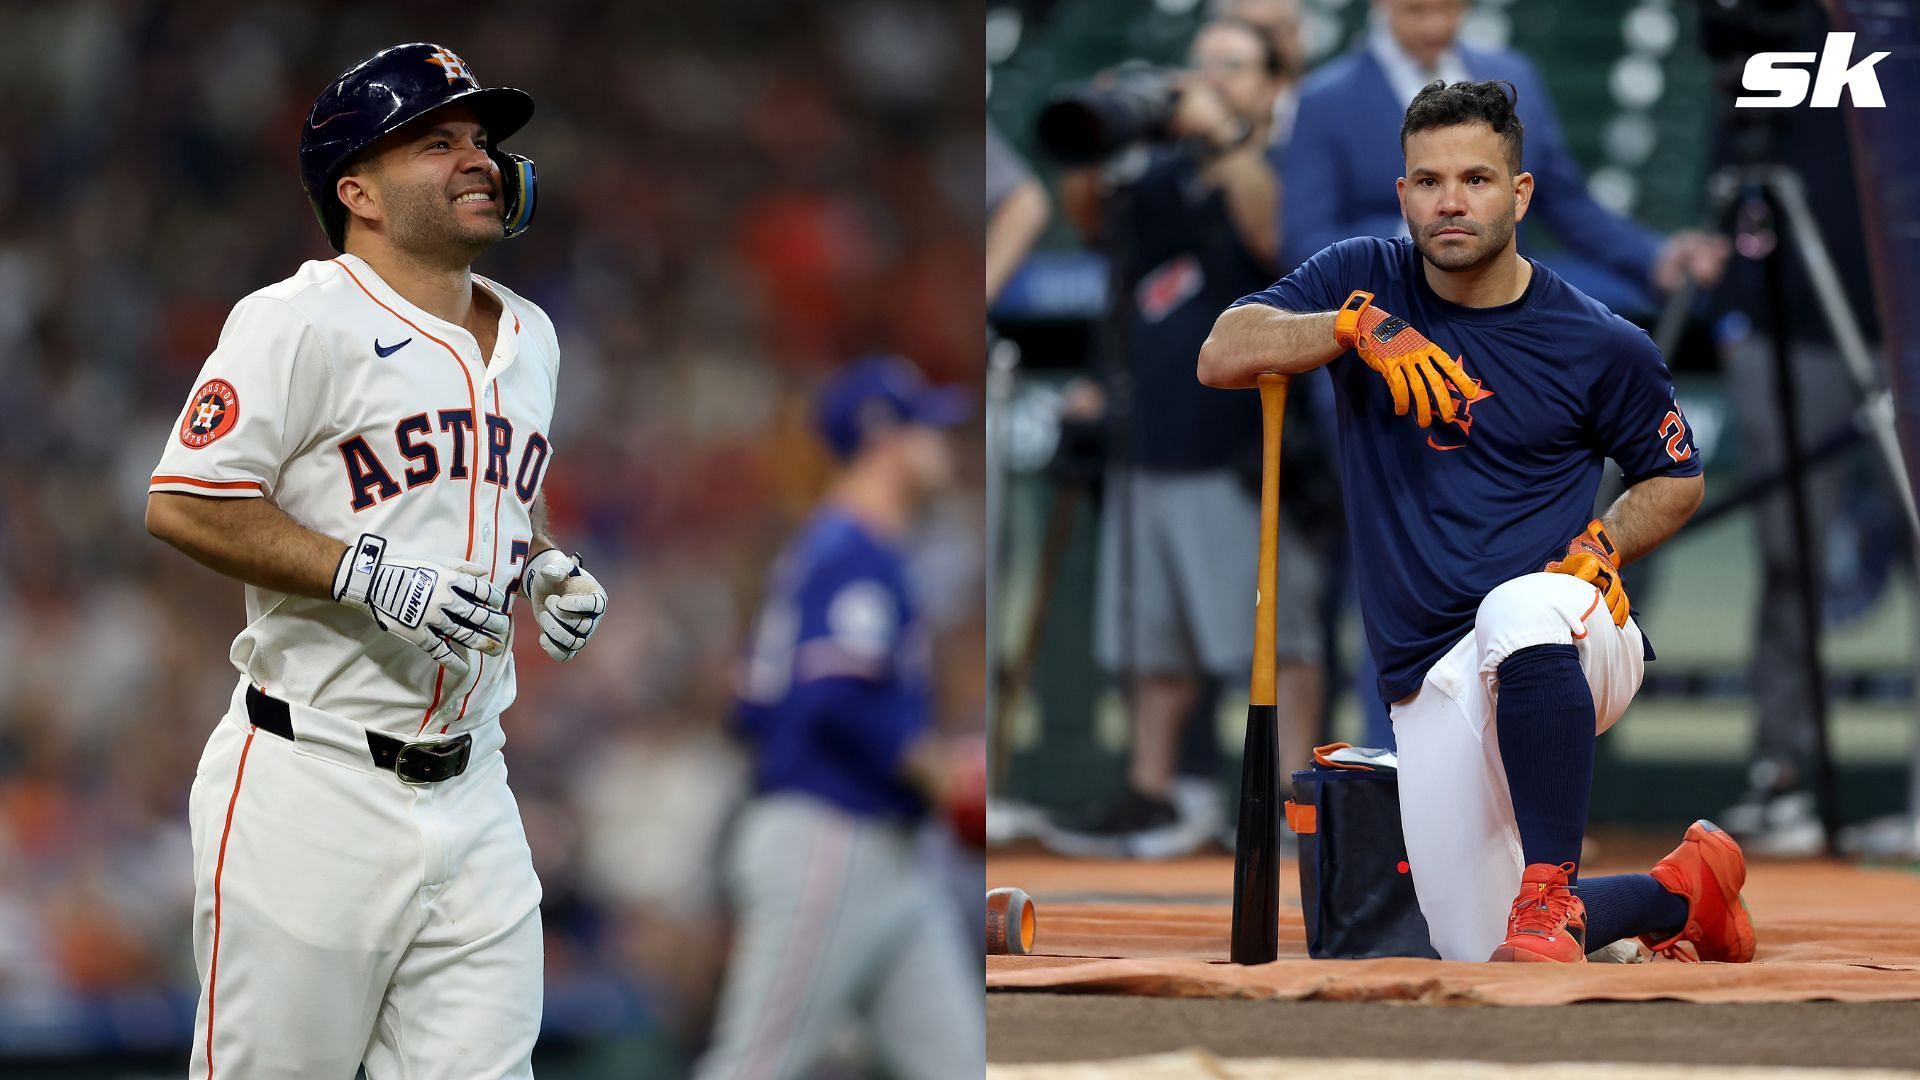 Jose Altuve is trying to keep positive amidst the Astros horrid start to the year